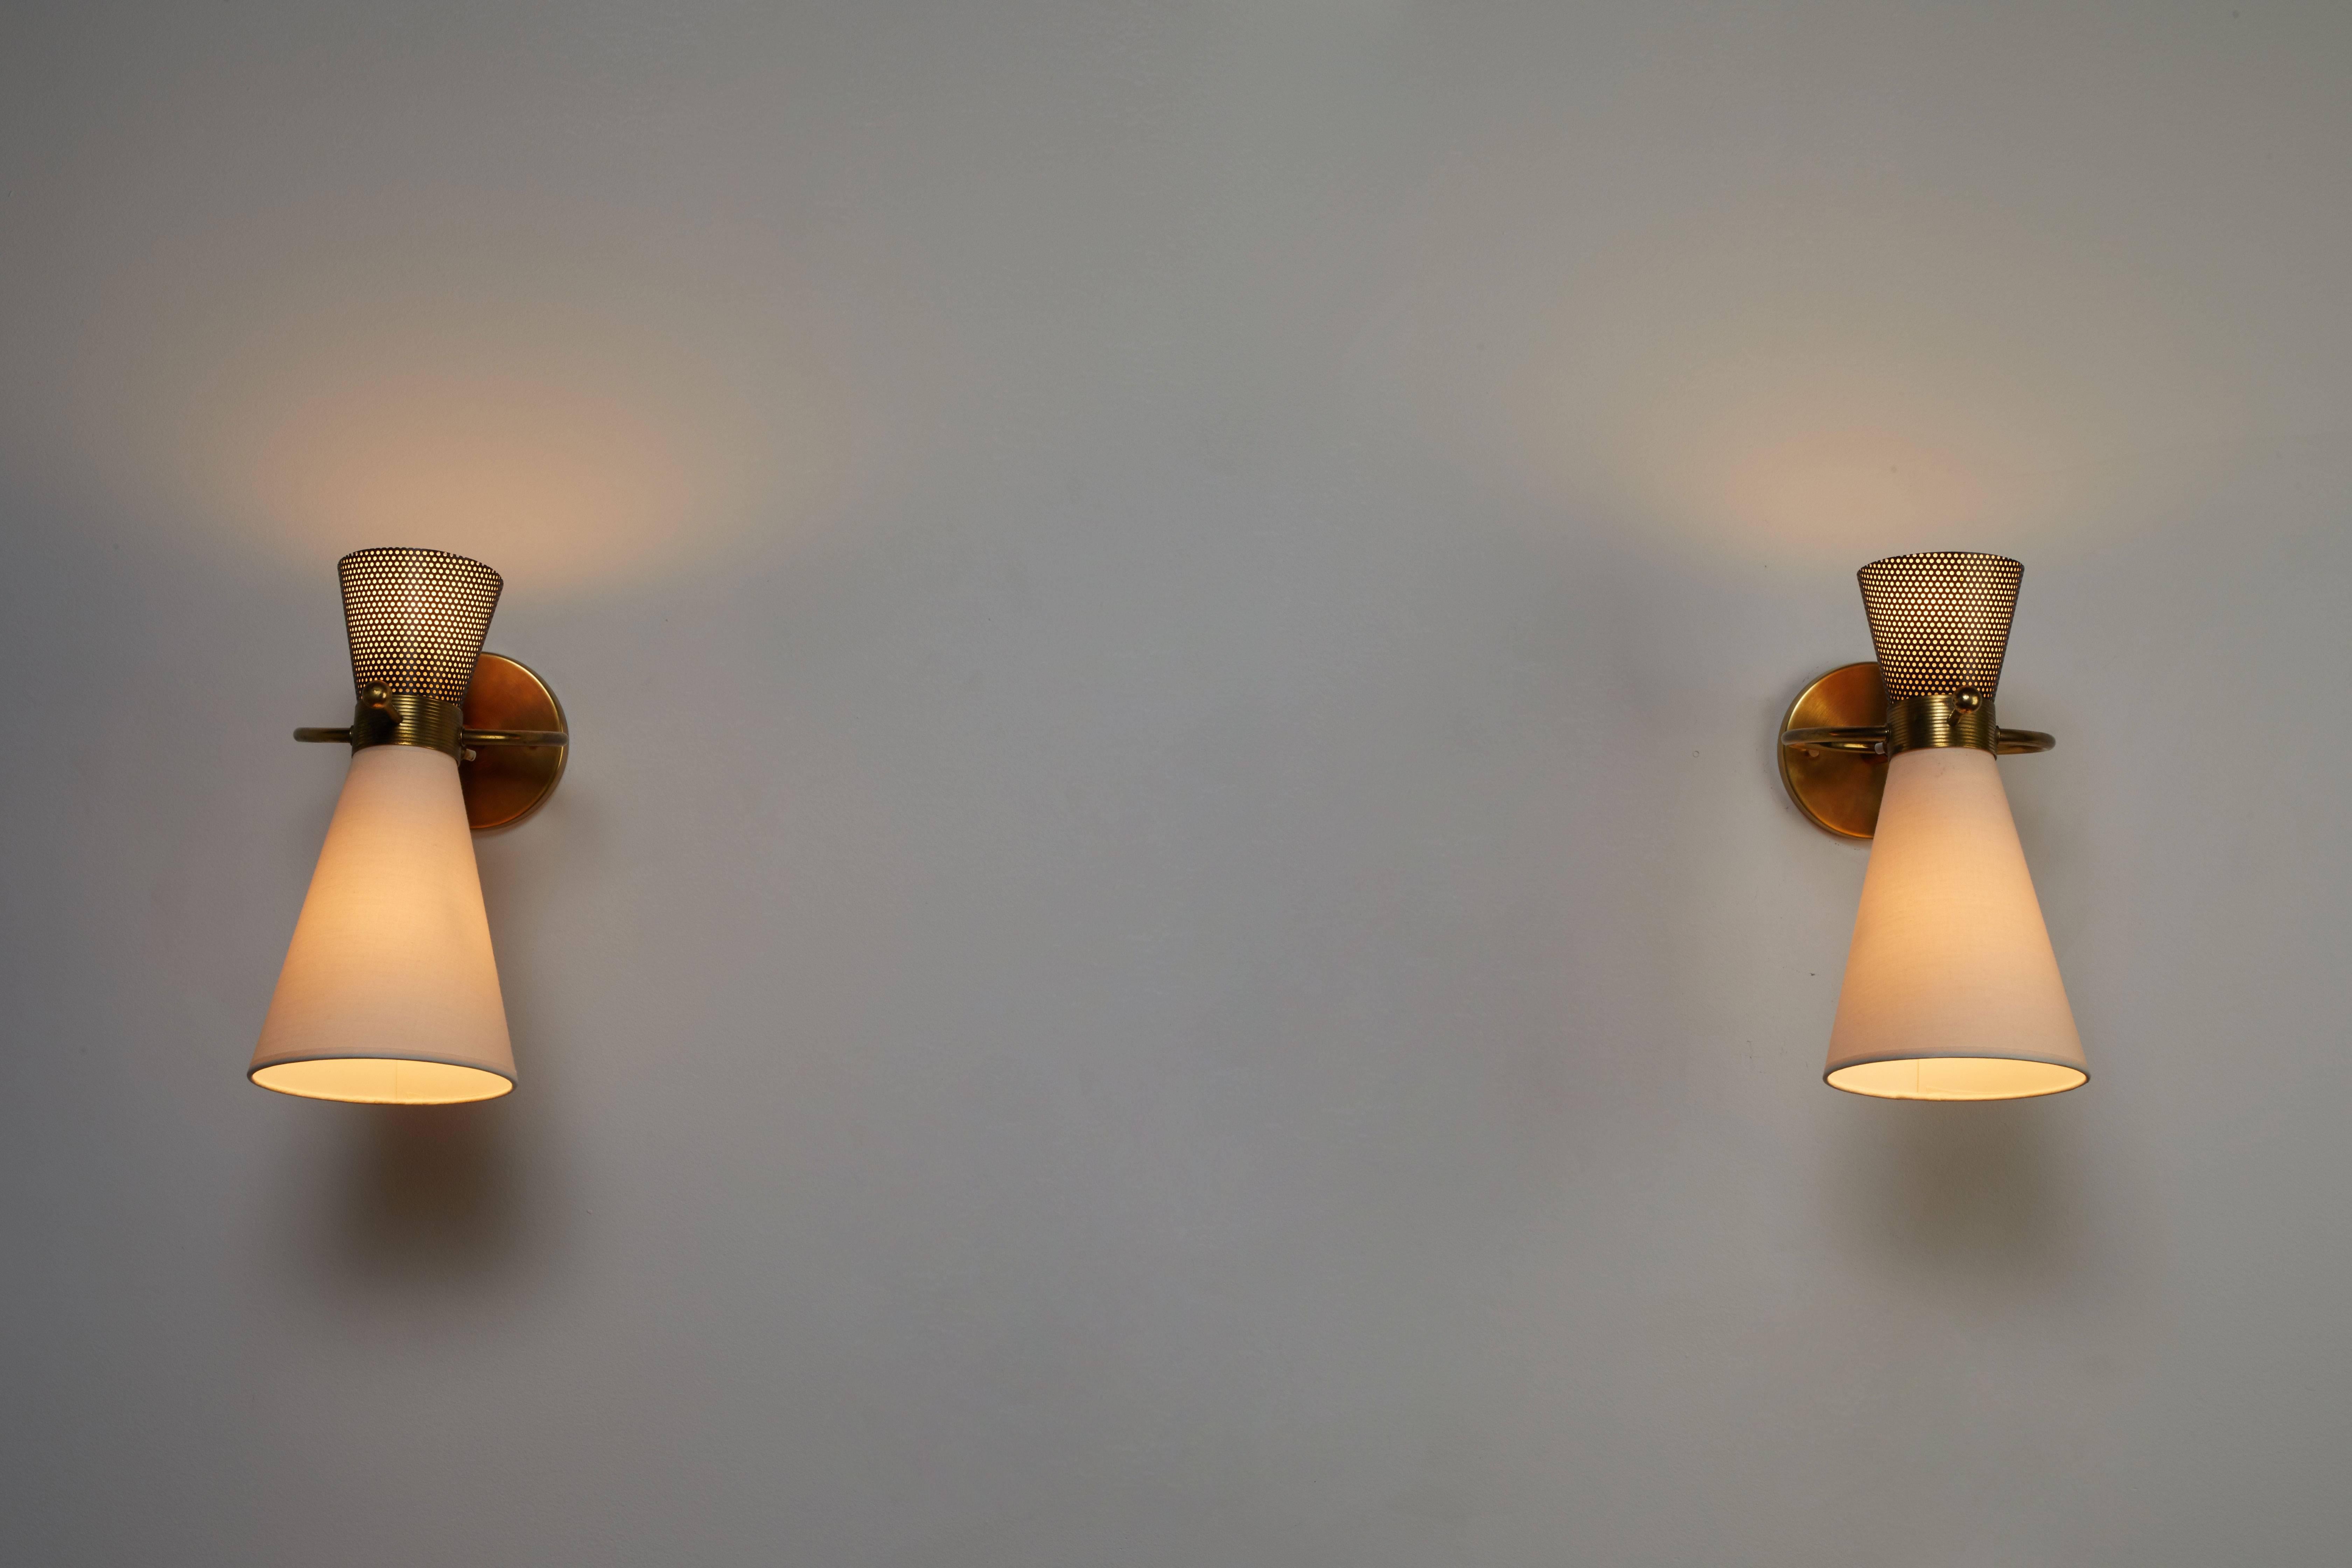 Pair of sconces by Maison Arlus manufactured in France, circa 1950s. Perforated enameled metal, silk shades and brass hardware. Sconces pivot up/down and left/right. Wired for US junction boxes. Each sconce takes one 60w bayonet bulb.